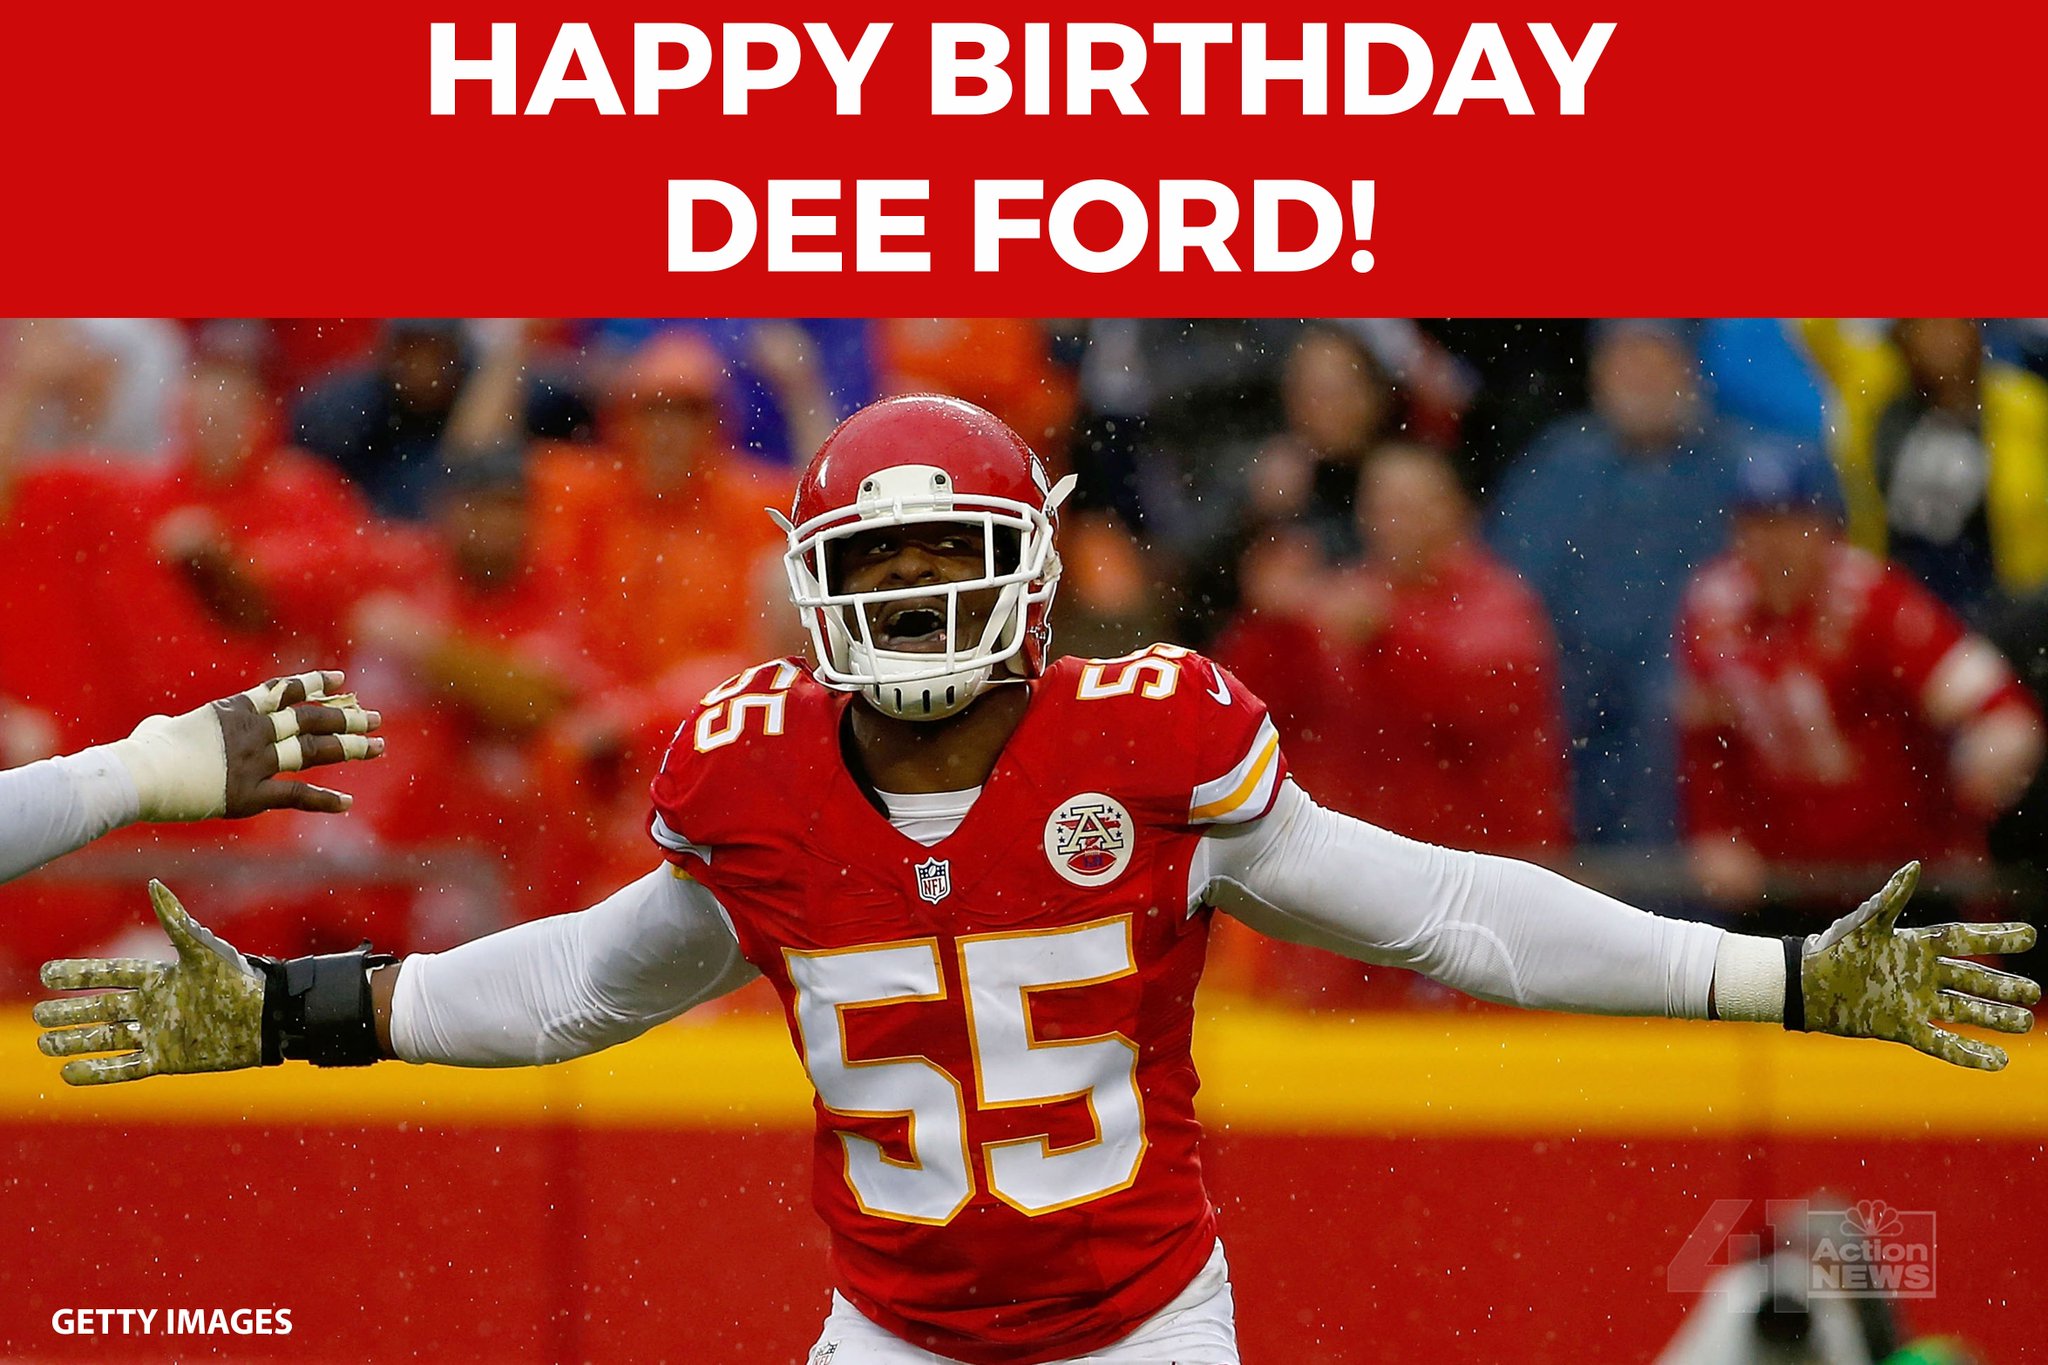 HAPPY BIRTHDAY to player Dee Ford! 